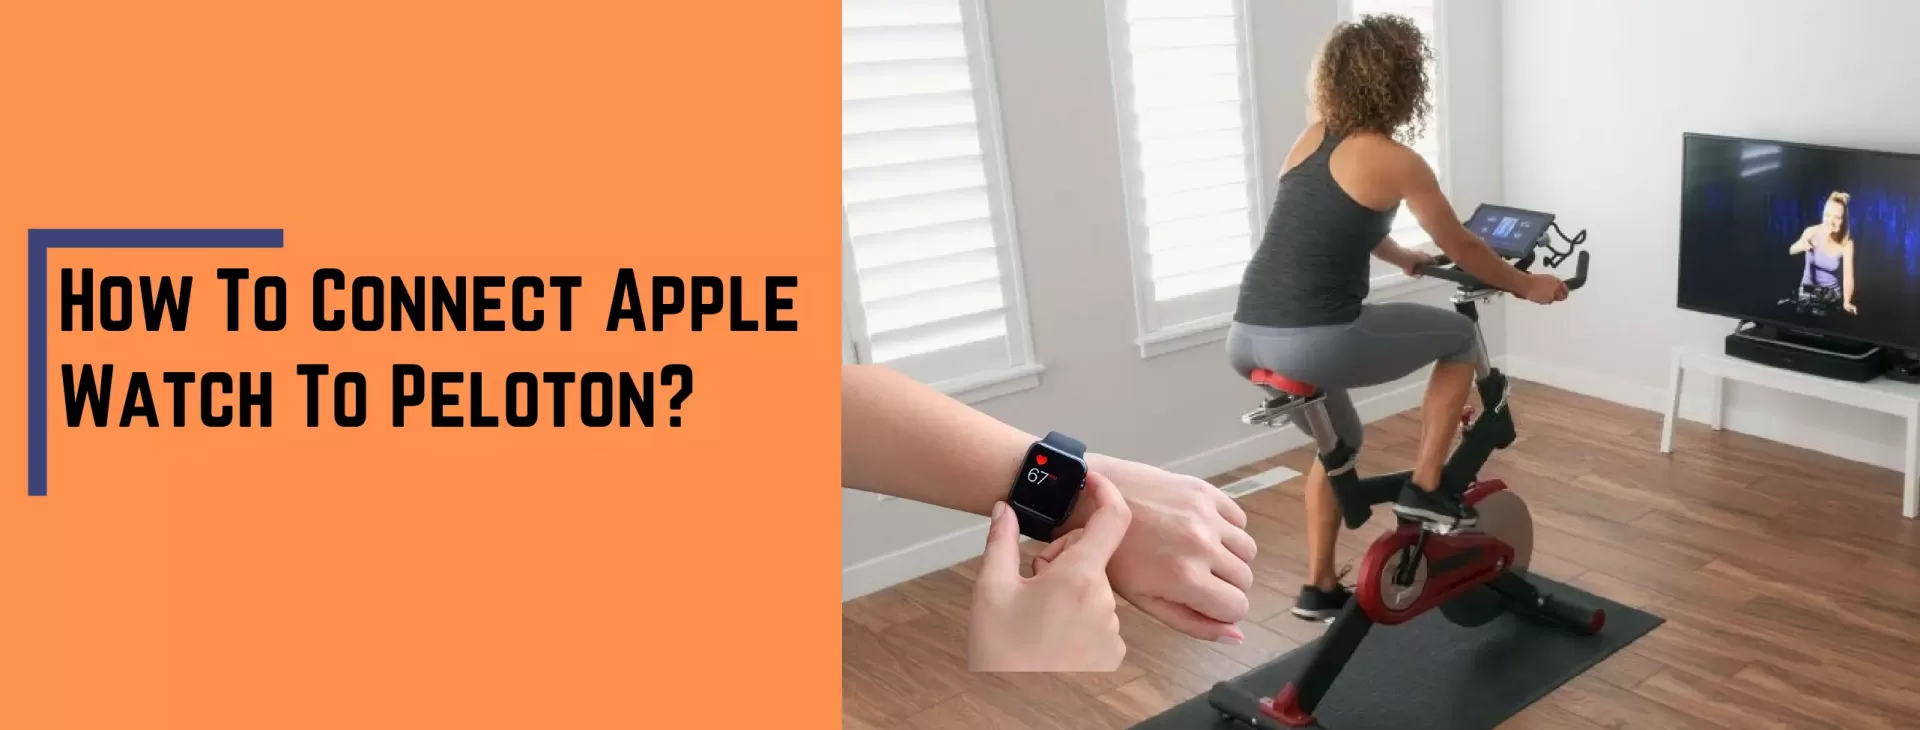 How To Connect Apple Watch To Peloton